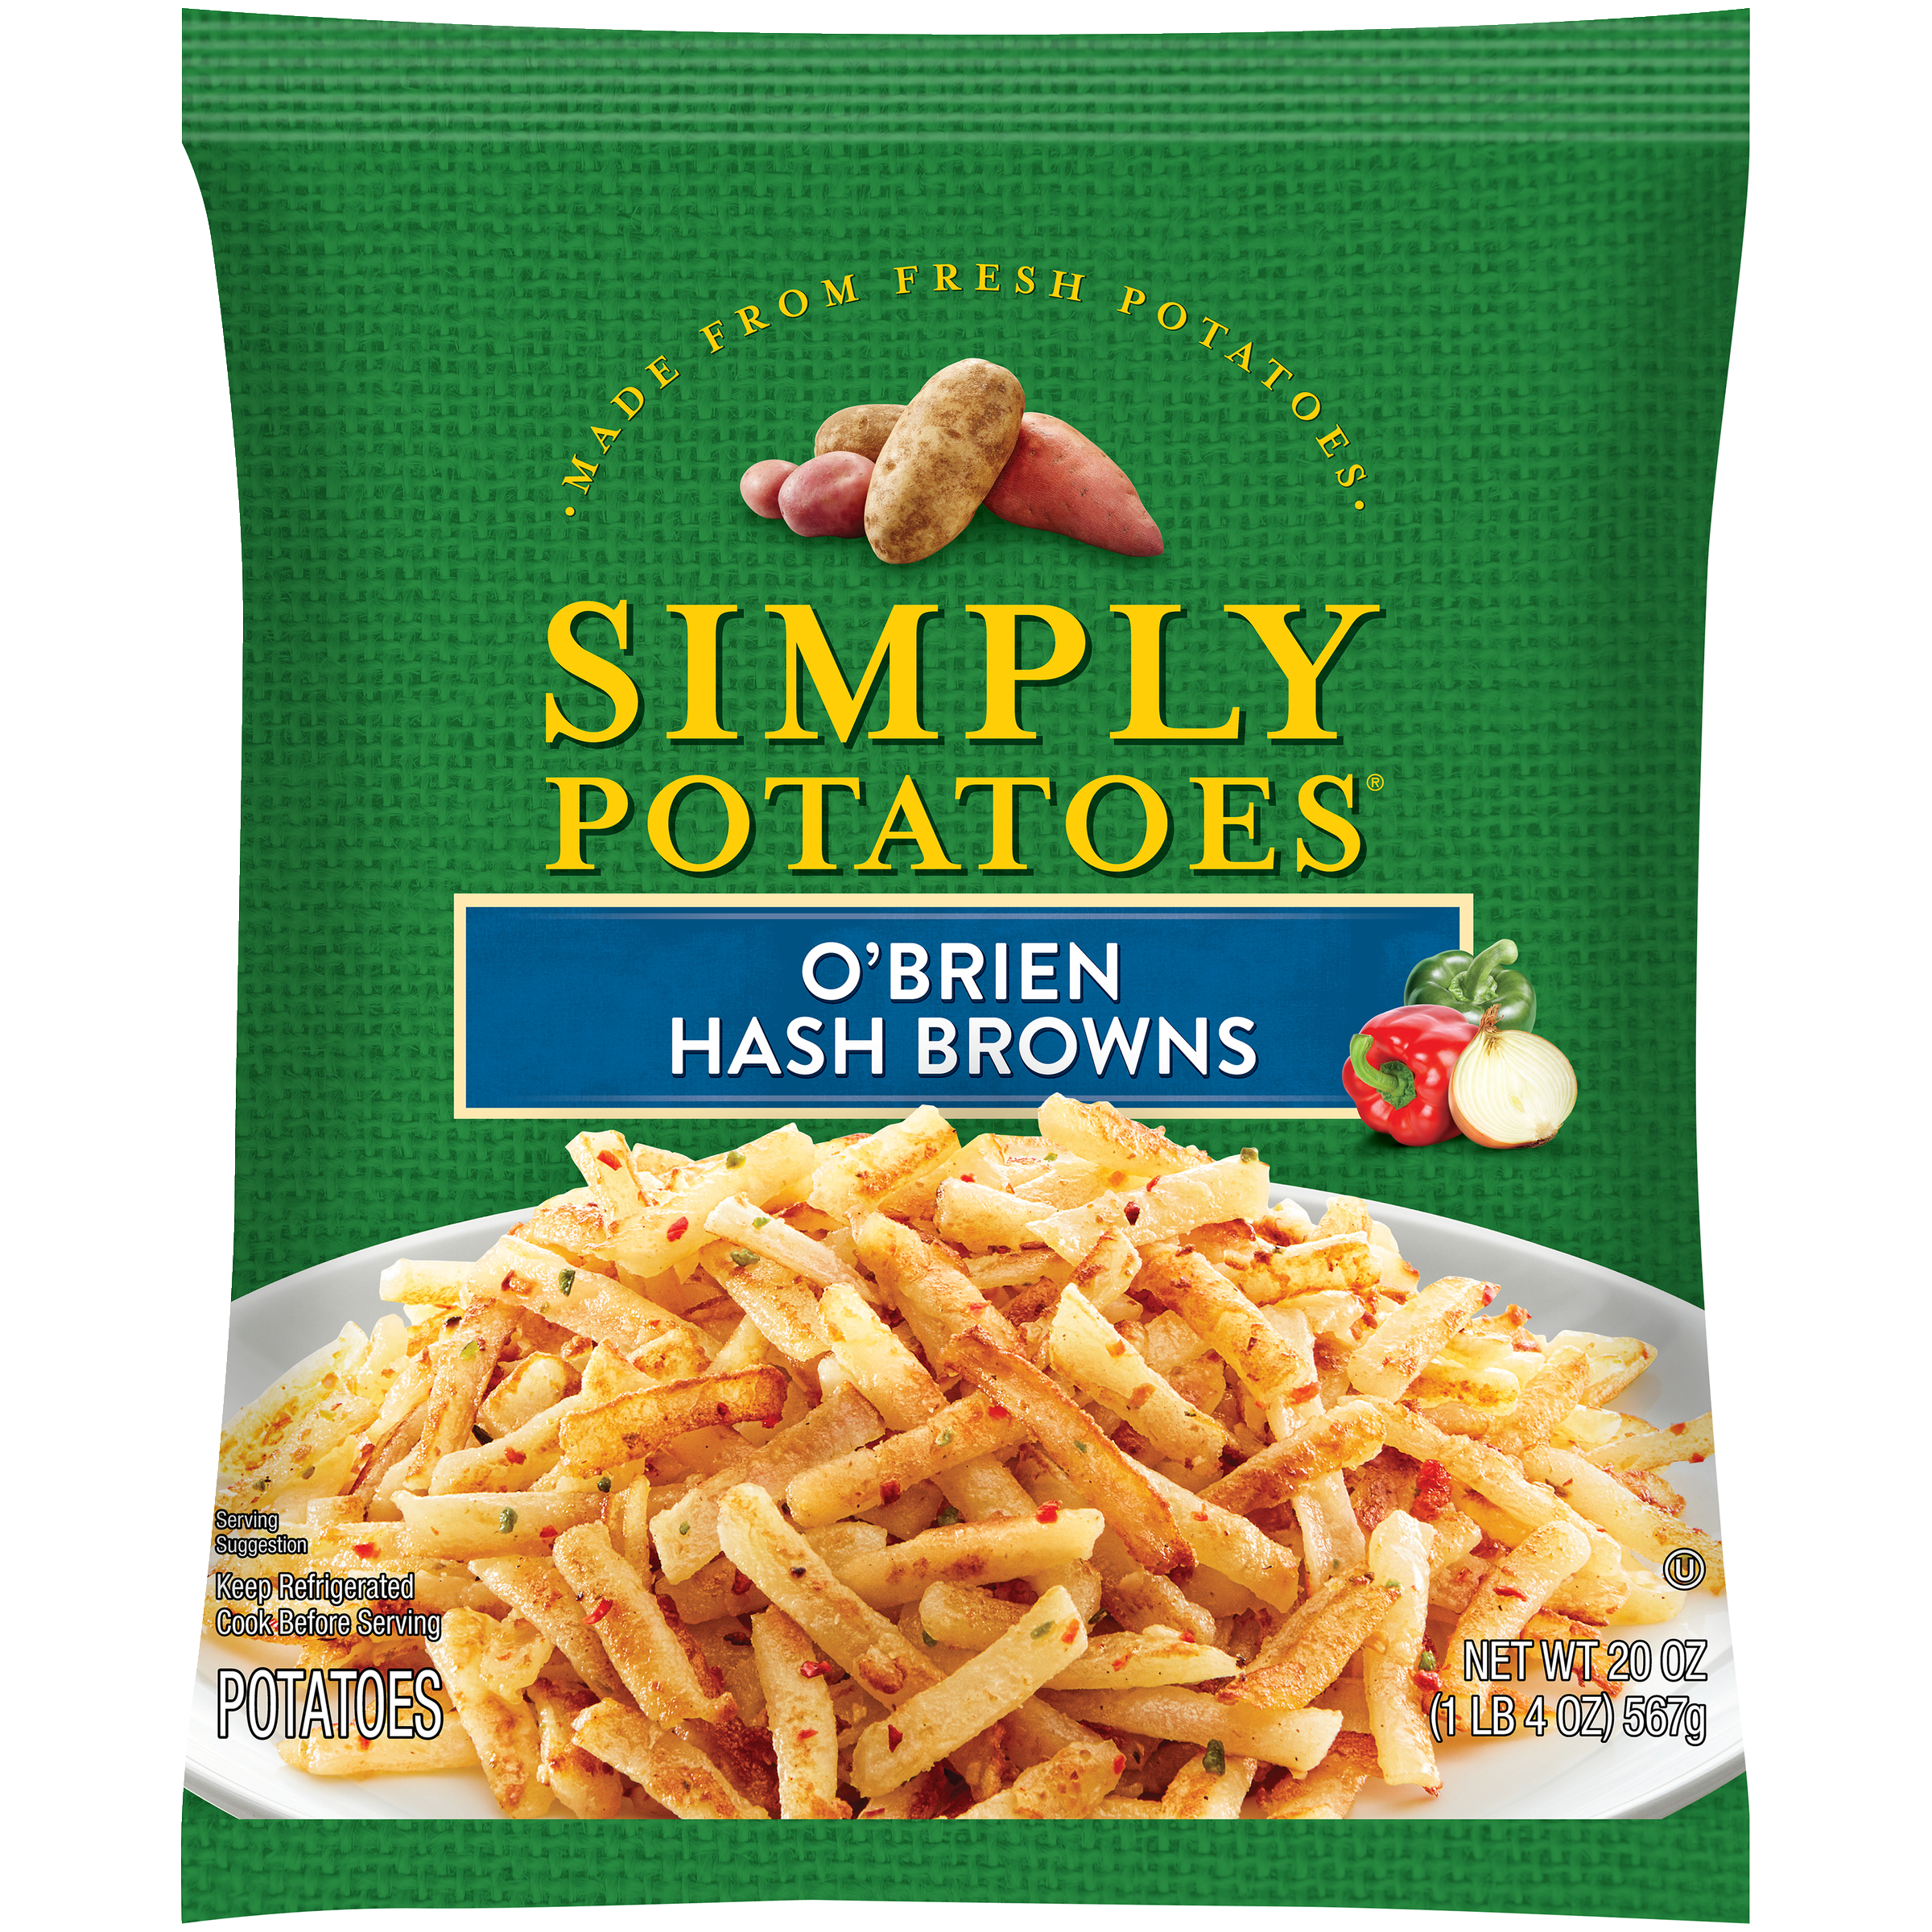 Simply Potatoes O’Brien Hash Browns product image